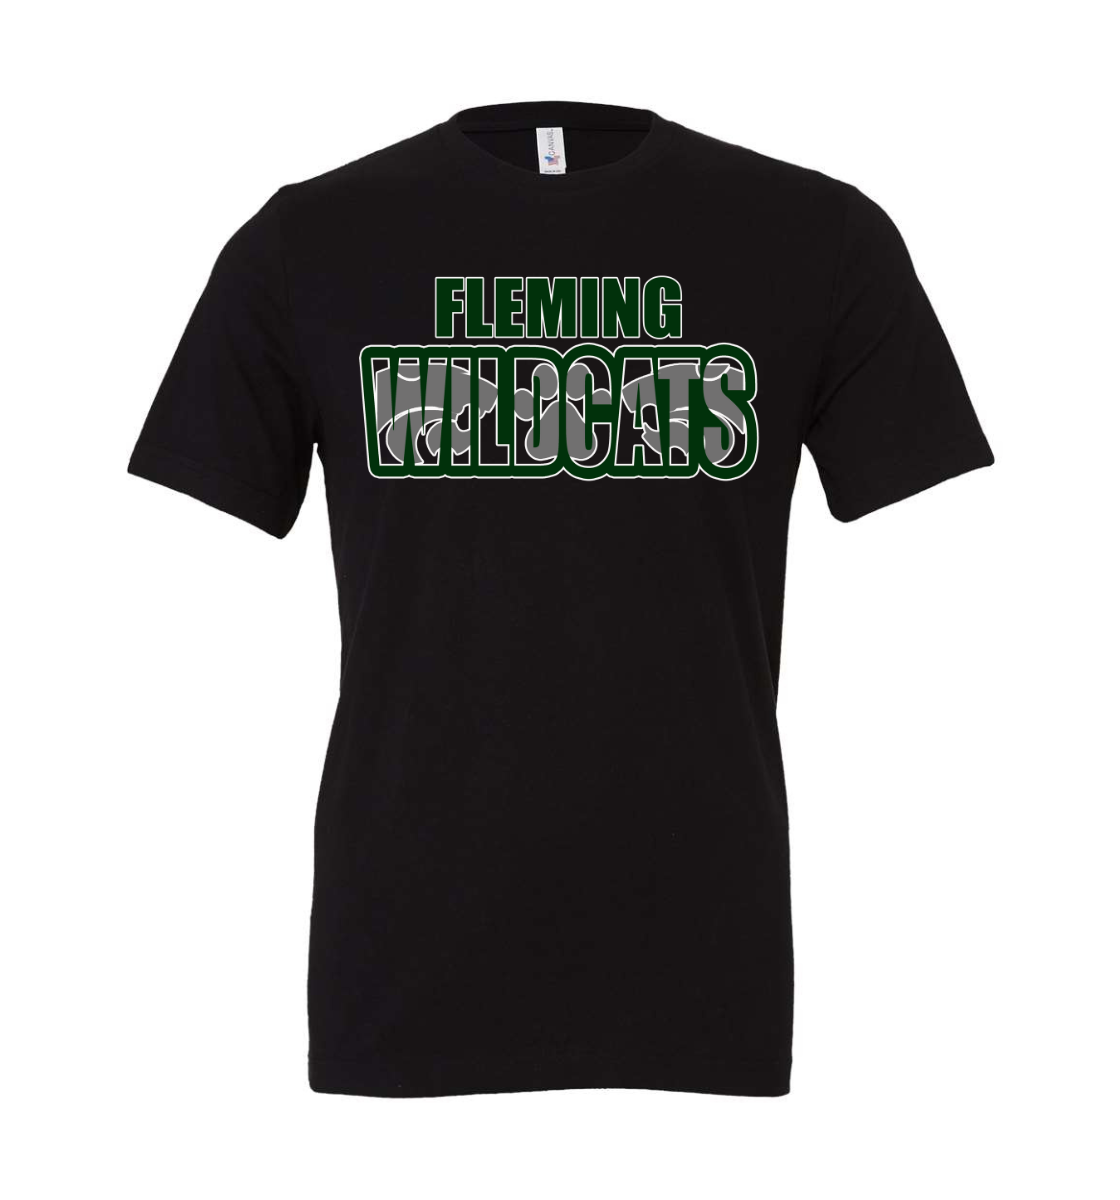 flemming wildcats t-shirt: for wildcats fans only!